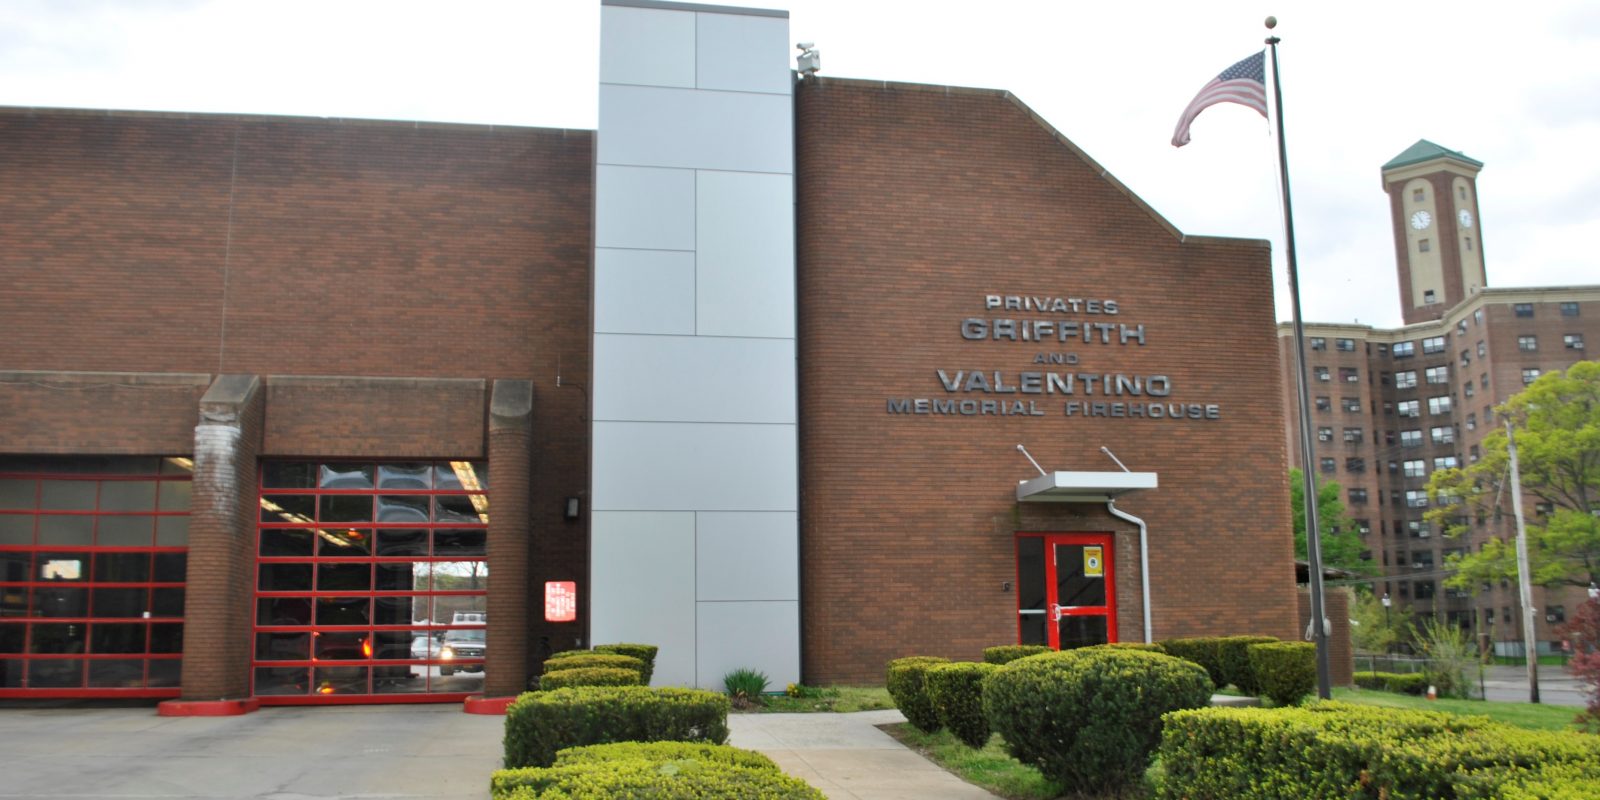 Pvts.Griffith & Valentino Memorial Firehouse